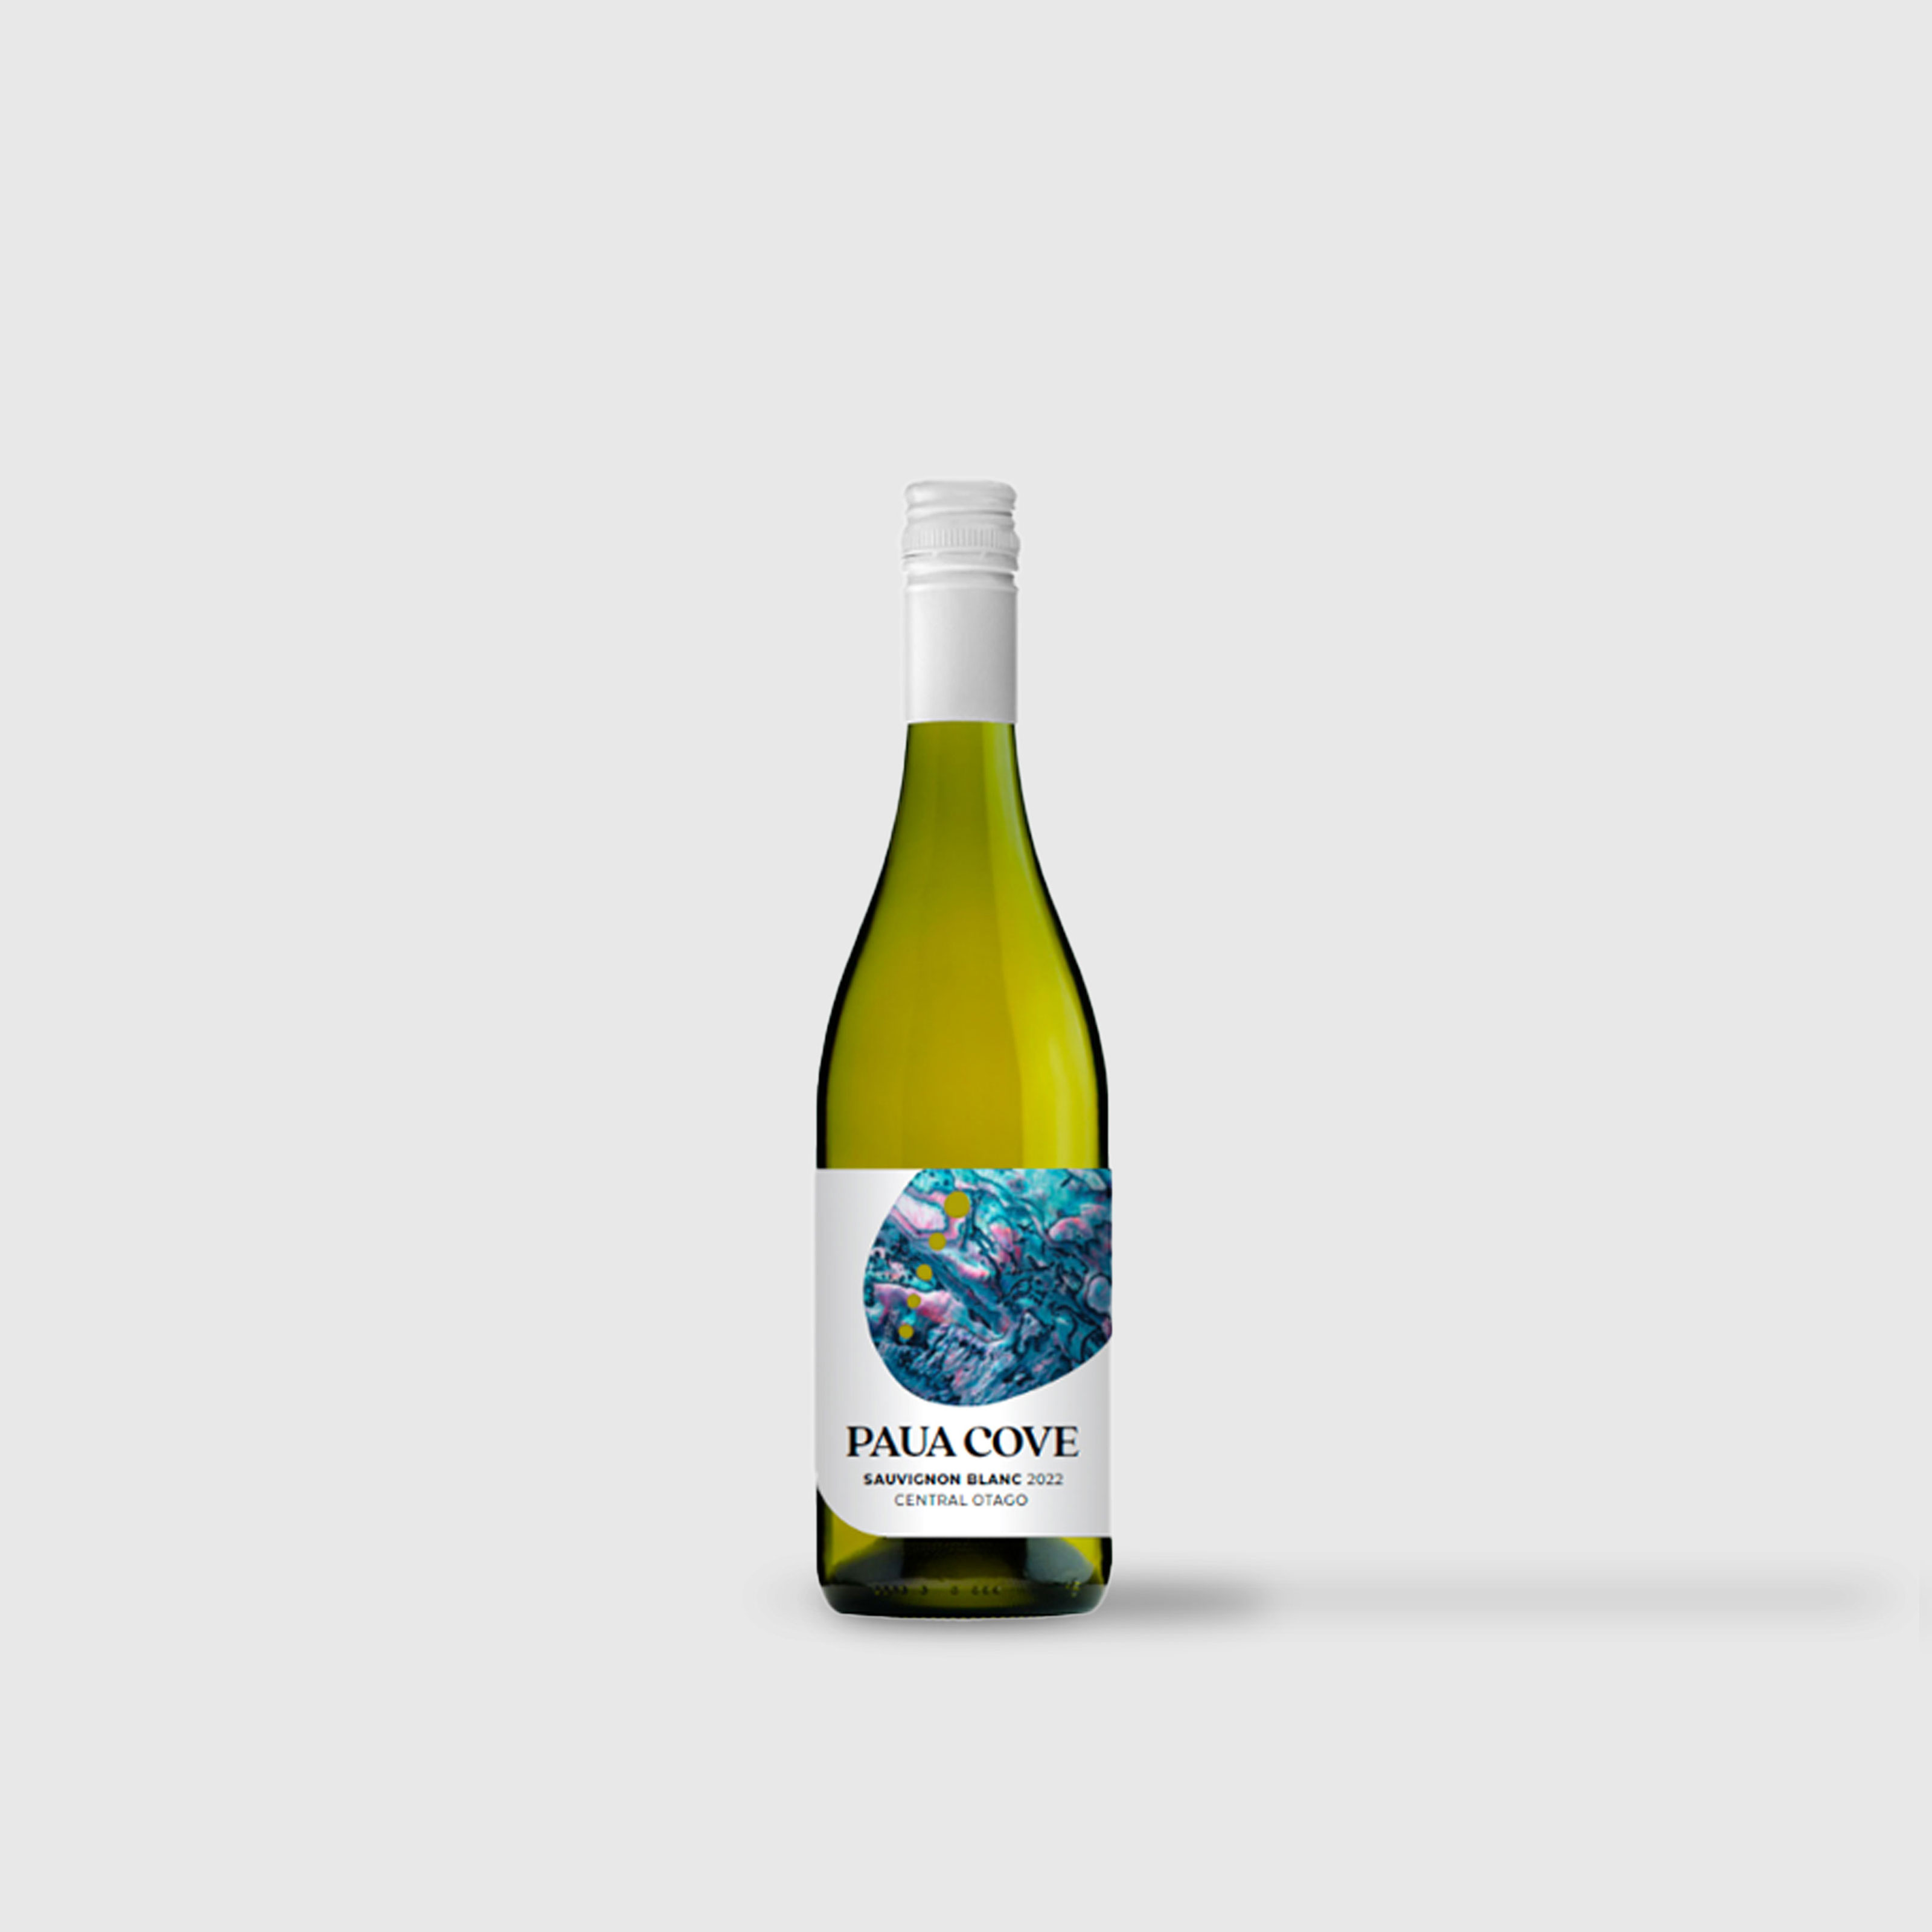 - Vine - at NZ Online Hawkes Label 2022 Vineonline Hill Chardonnay Buy Sacred Bay Now Yellow